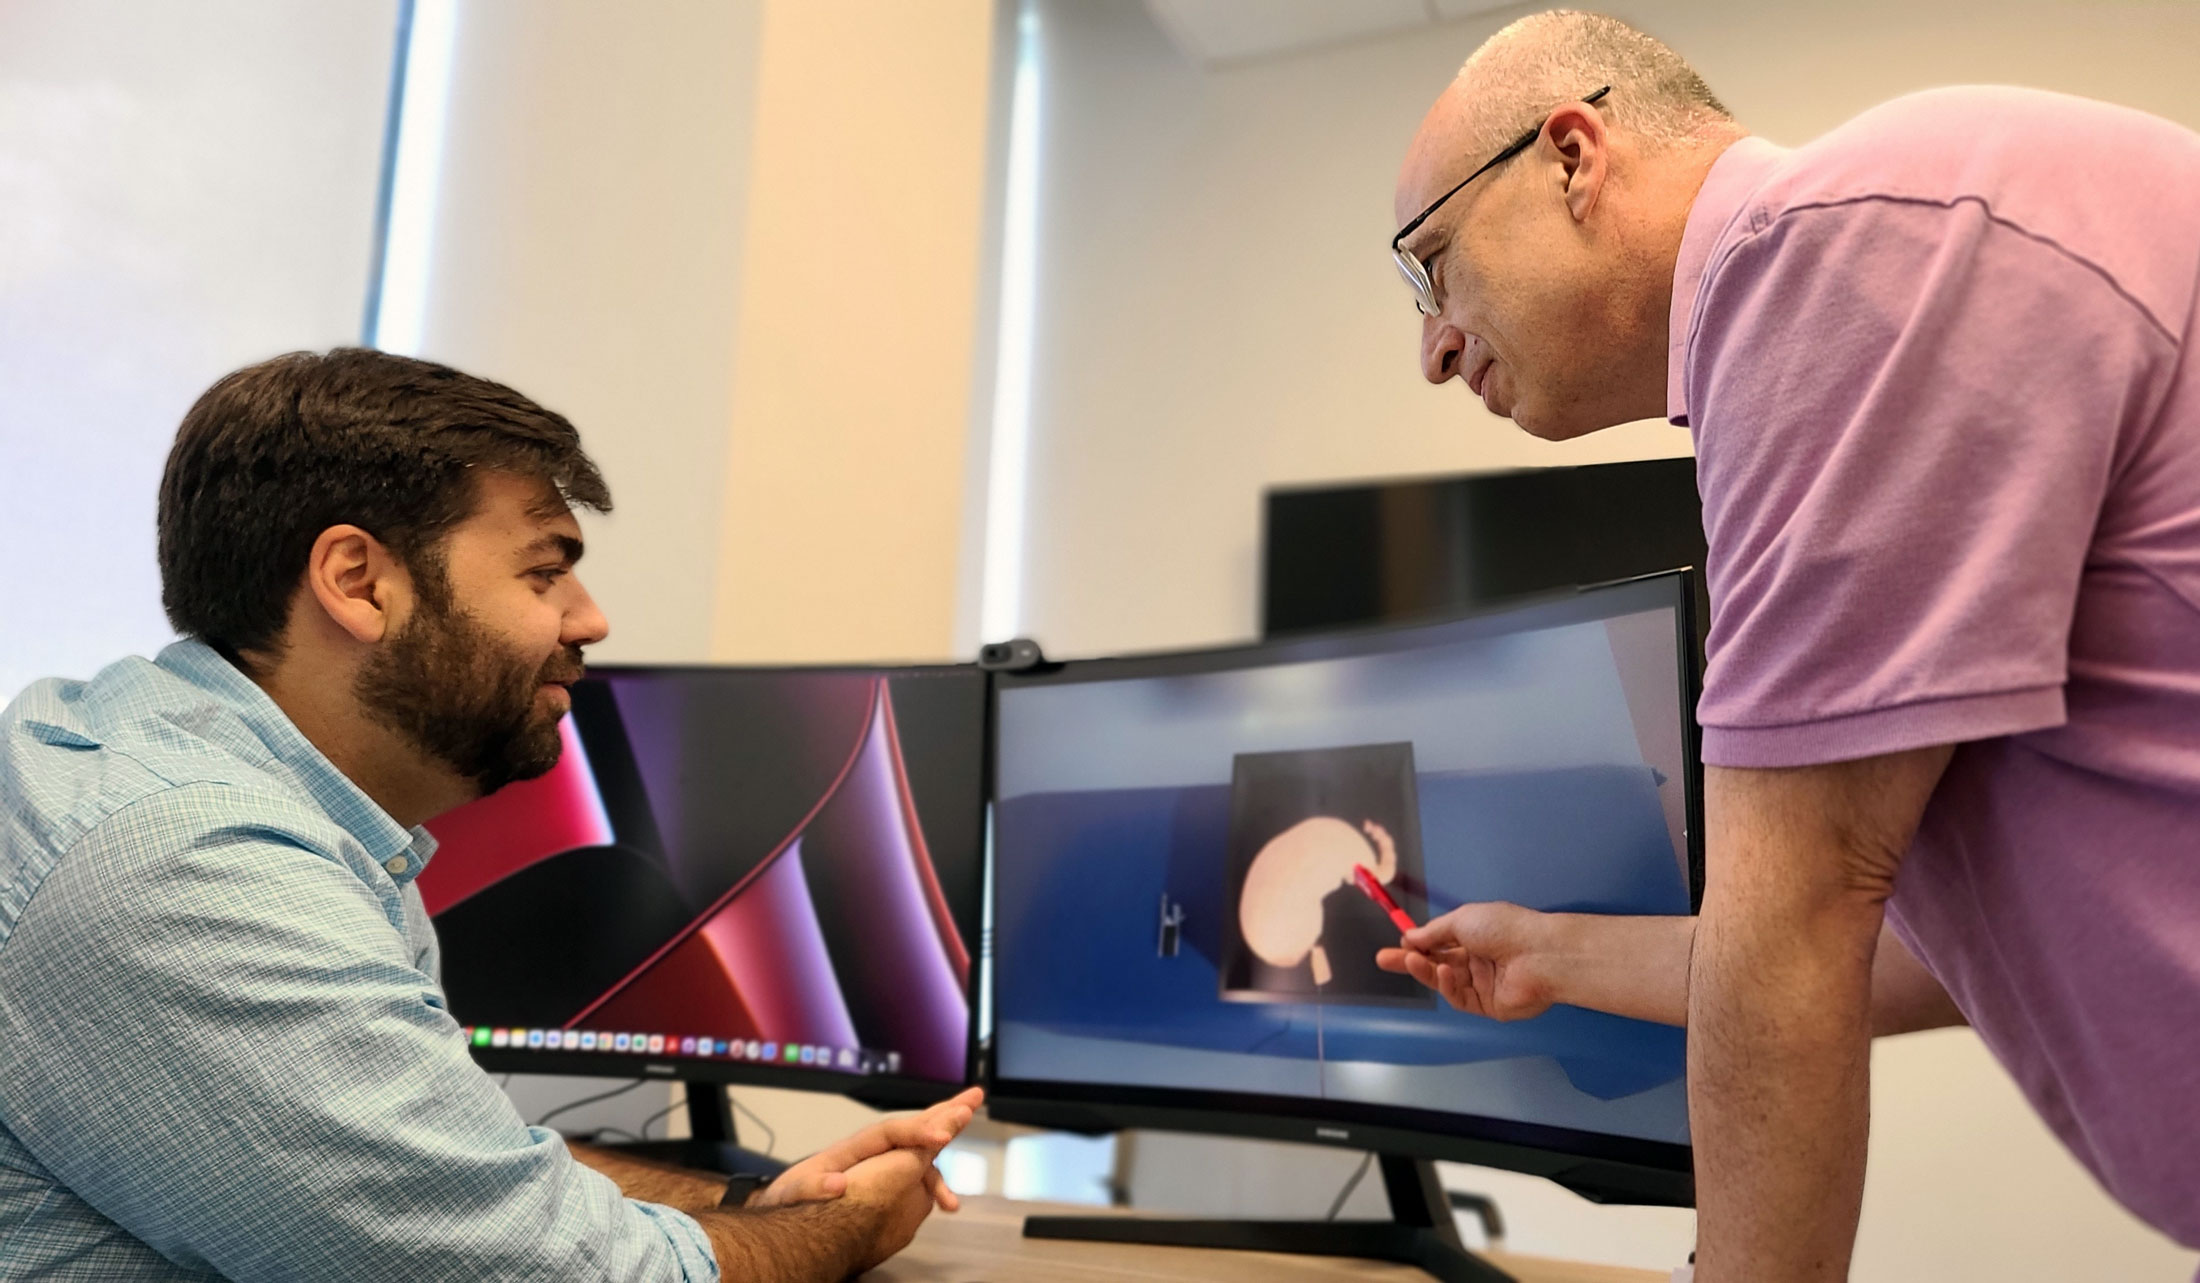 Dr. Doga Demirel and Dr. Onur Toker discuss the endoscopic sleeve gastroplasty simulator they are developing.